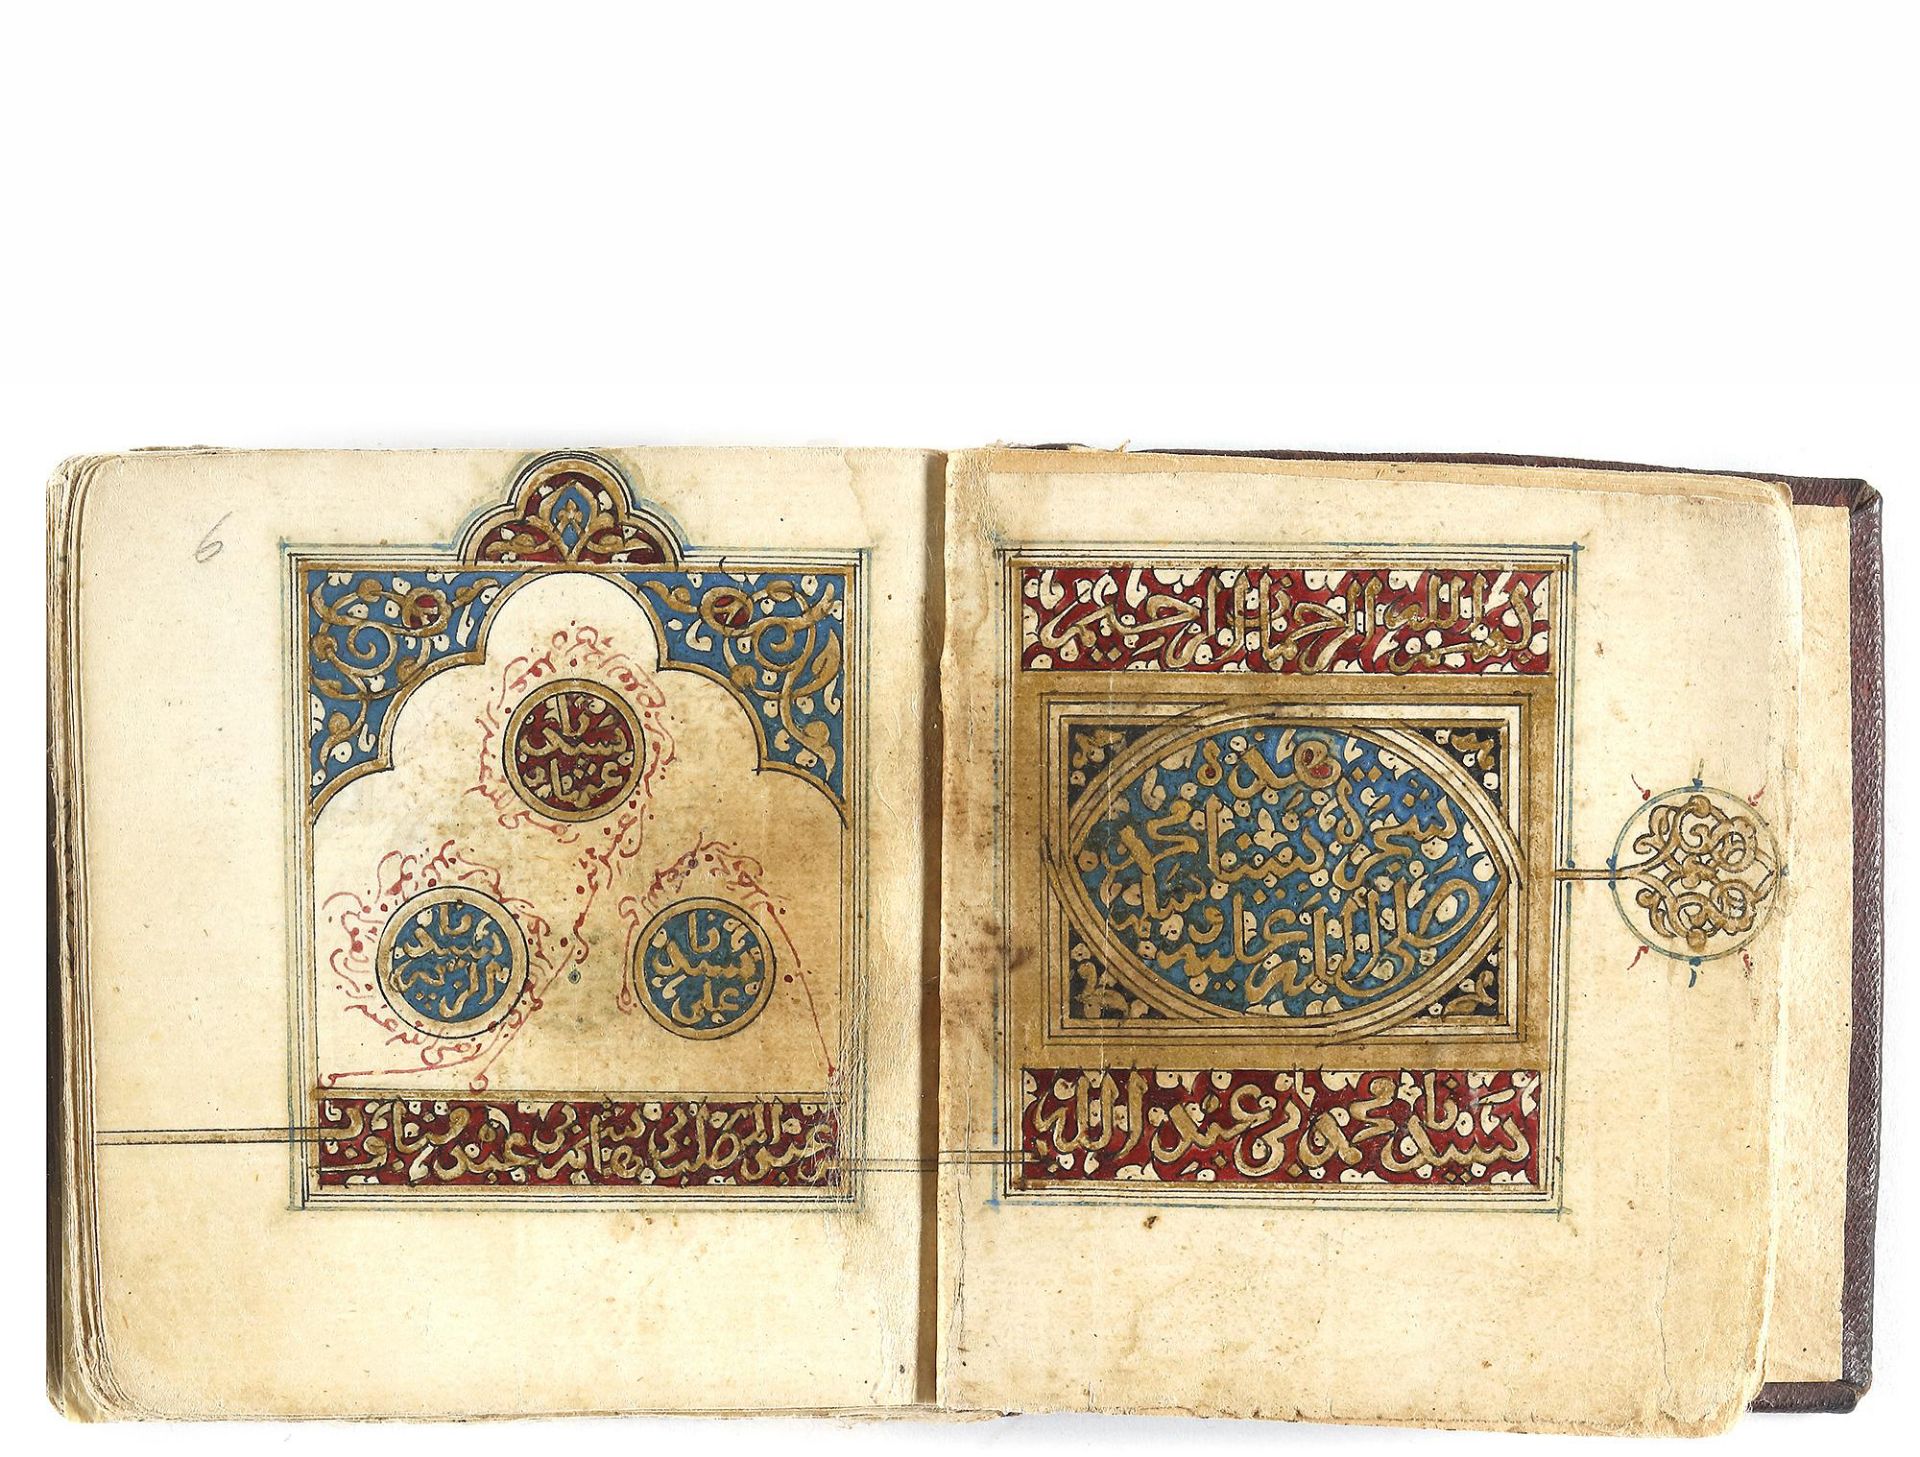 AN ILLUMINATED COLLECTION OF PRAYERS, INCLUDING DALA’IL AL-KHAYRAT, MOROCCO, DATED 1196 AH/1685 AD